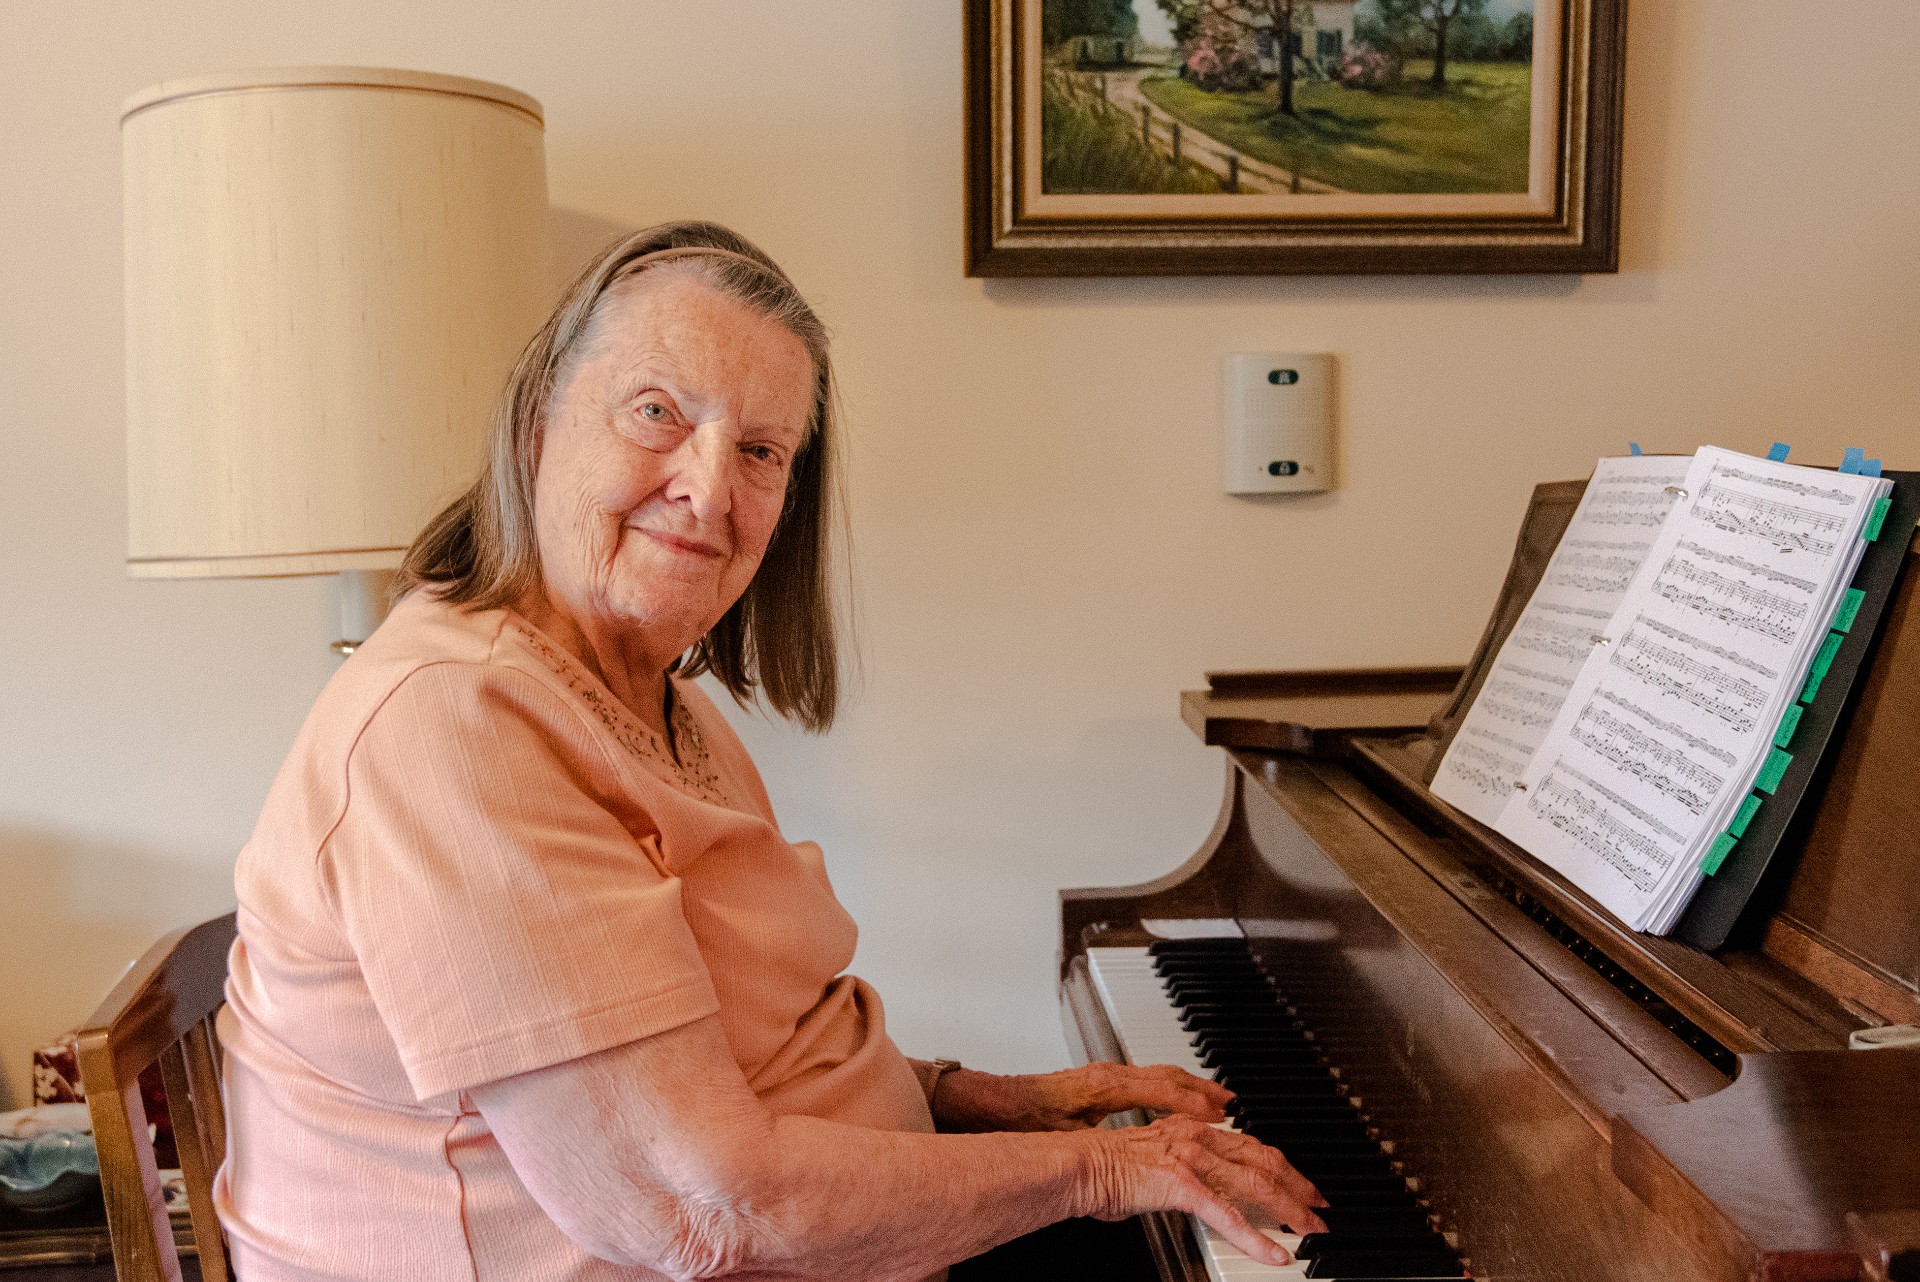 Music took Ruth all over the world, and it's still a big part of her life at The Village of Humber Heights.